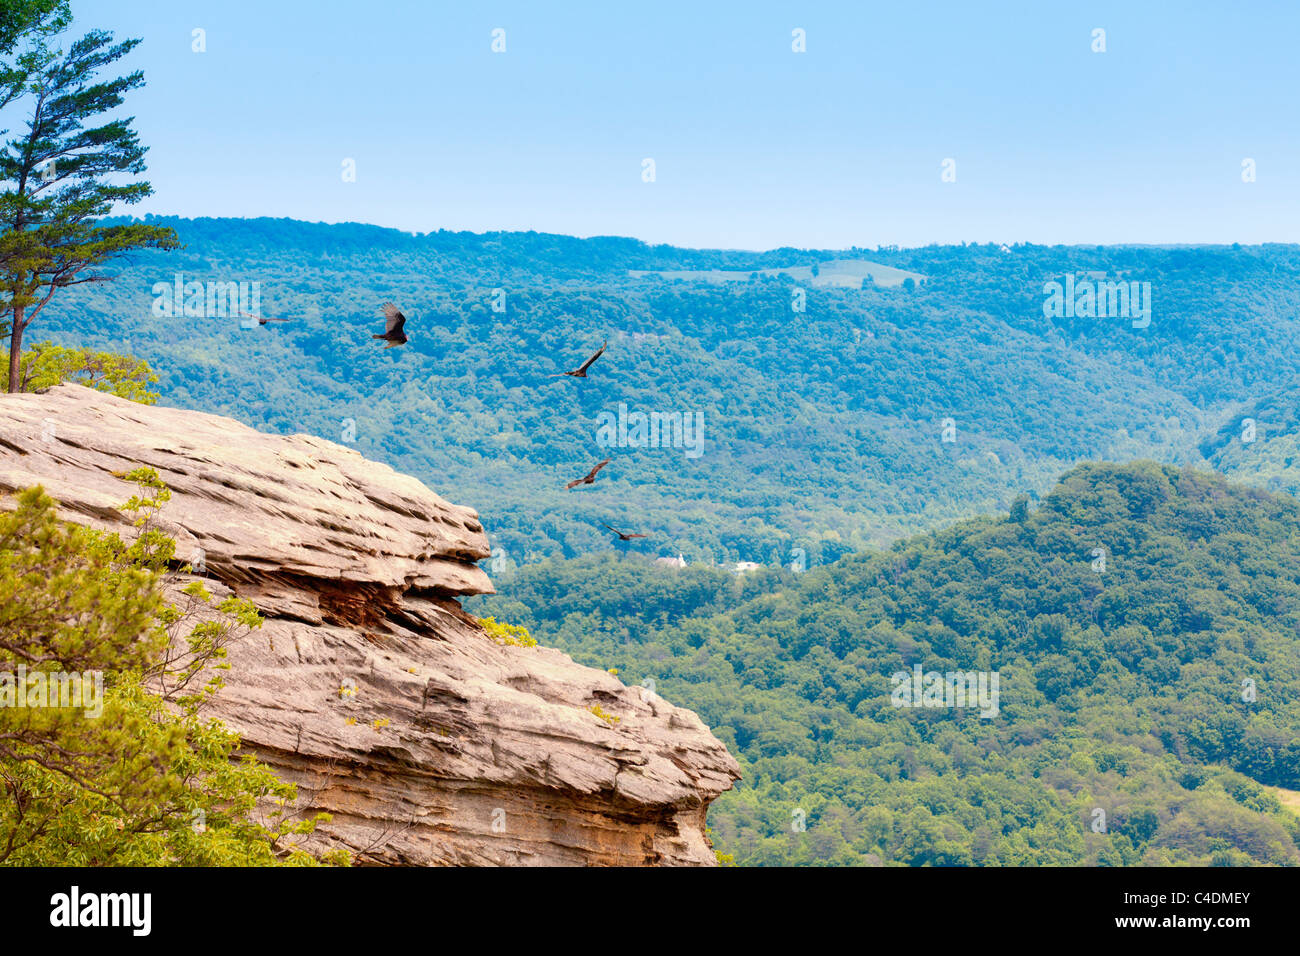 Turkey vultures circling over a cliff Stock Photo